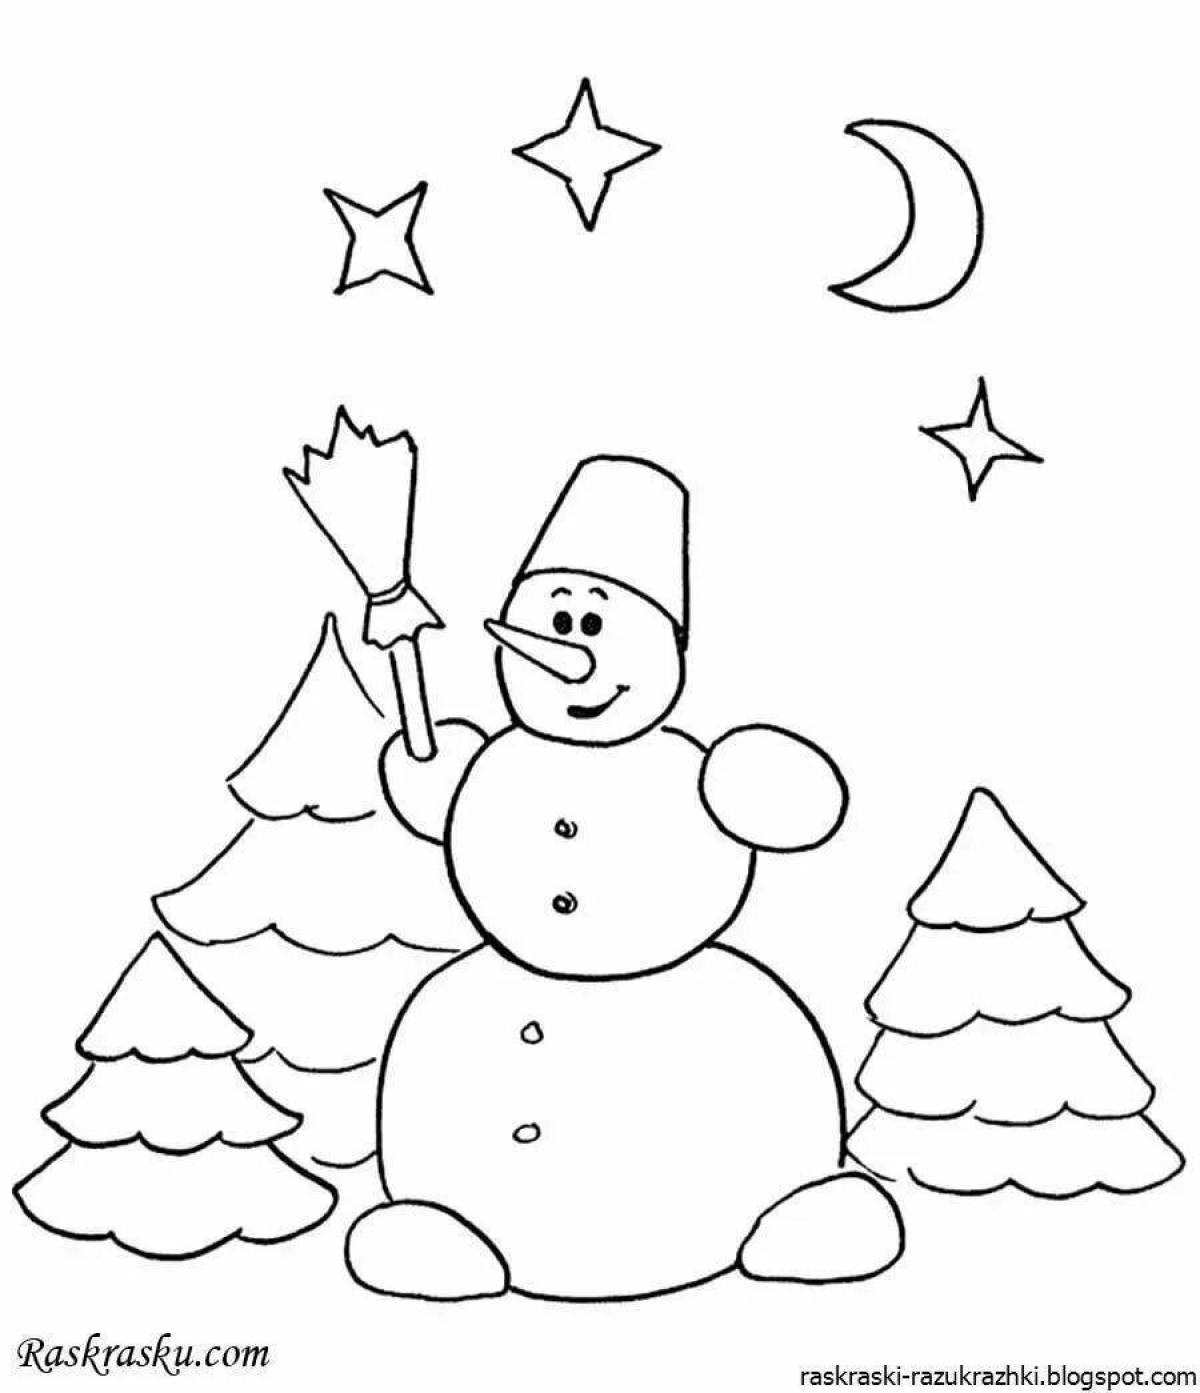 Great snowman coloring book for kids 2-3 years old